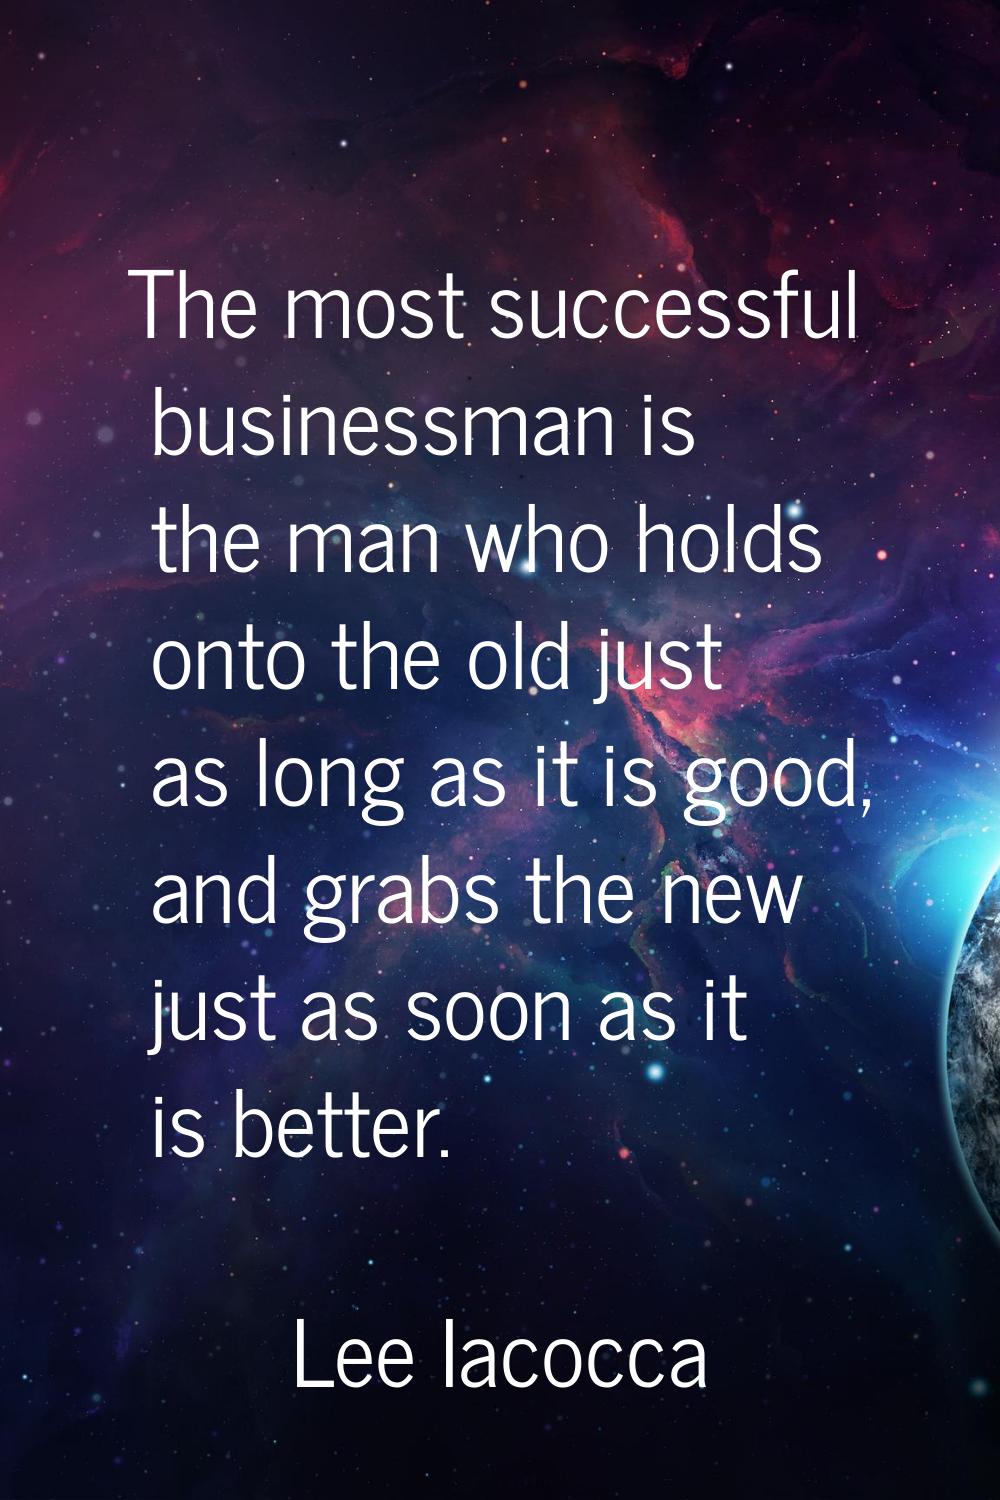 The most successful businessman is the man who holds onto the old just as long as it is good, and g